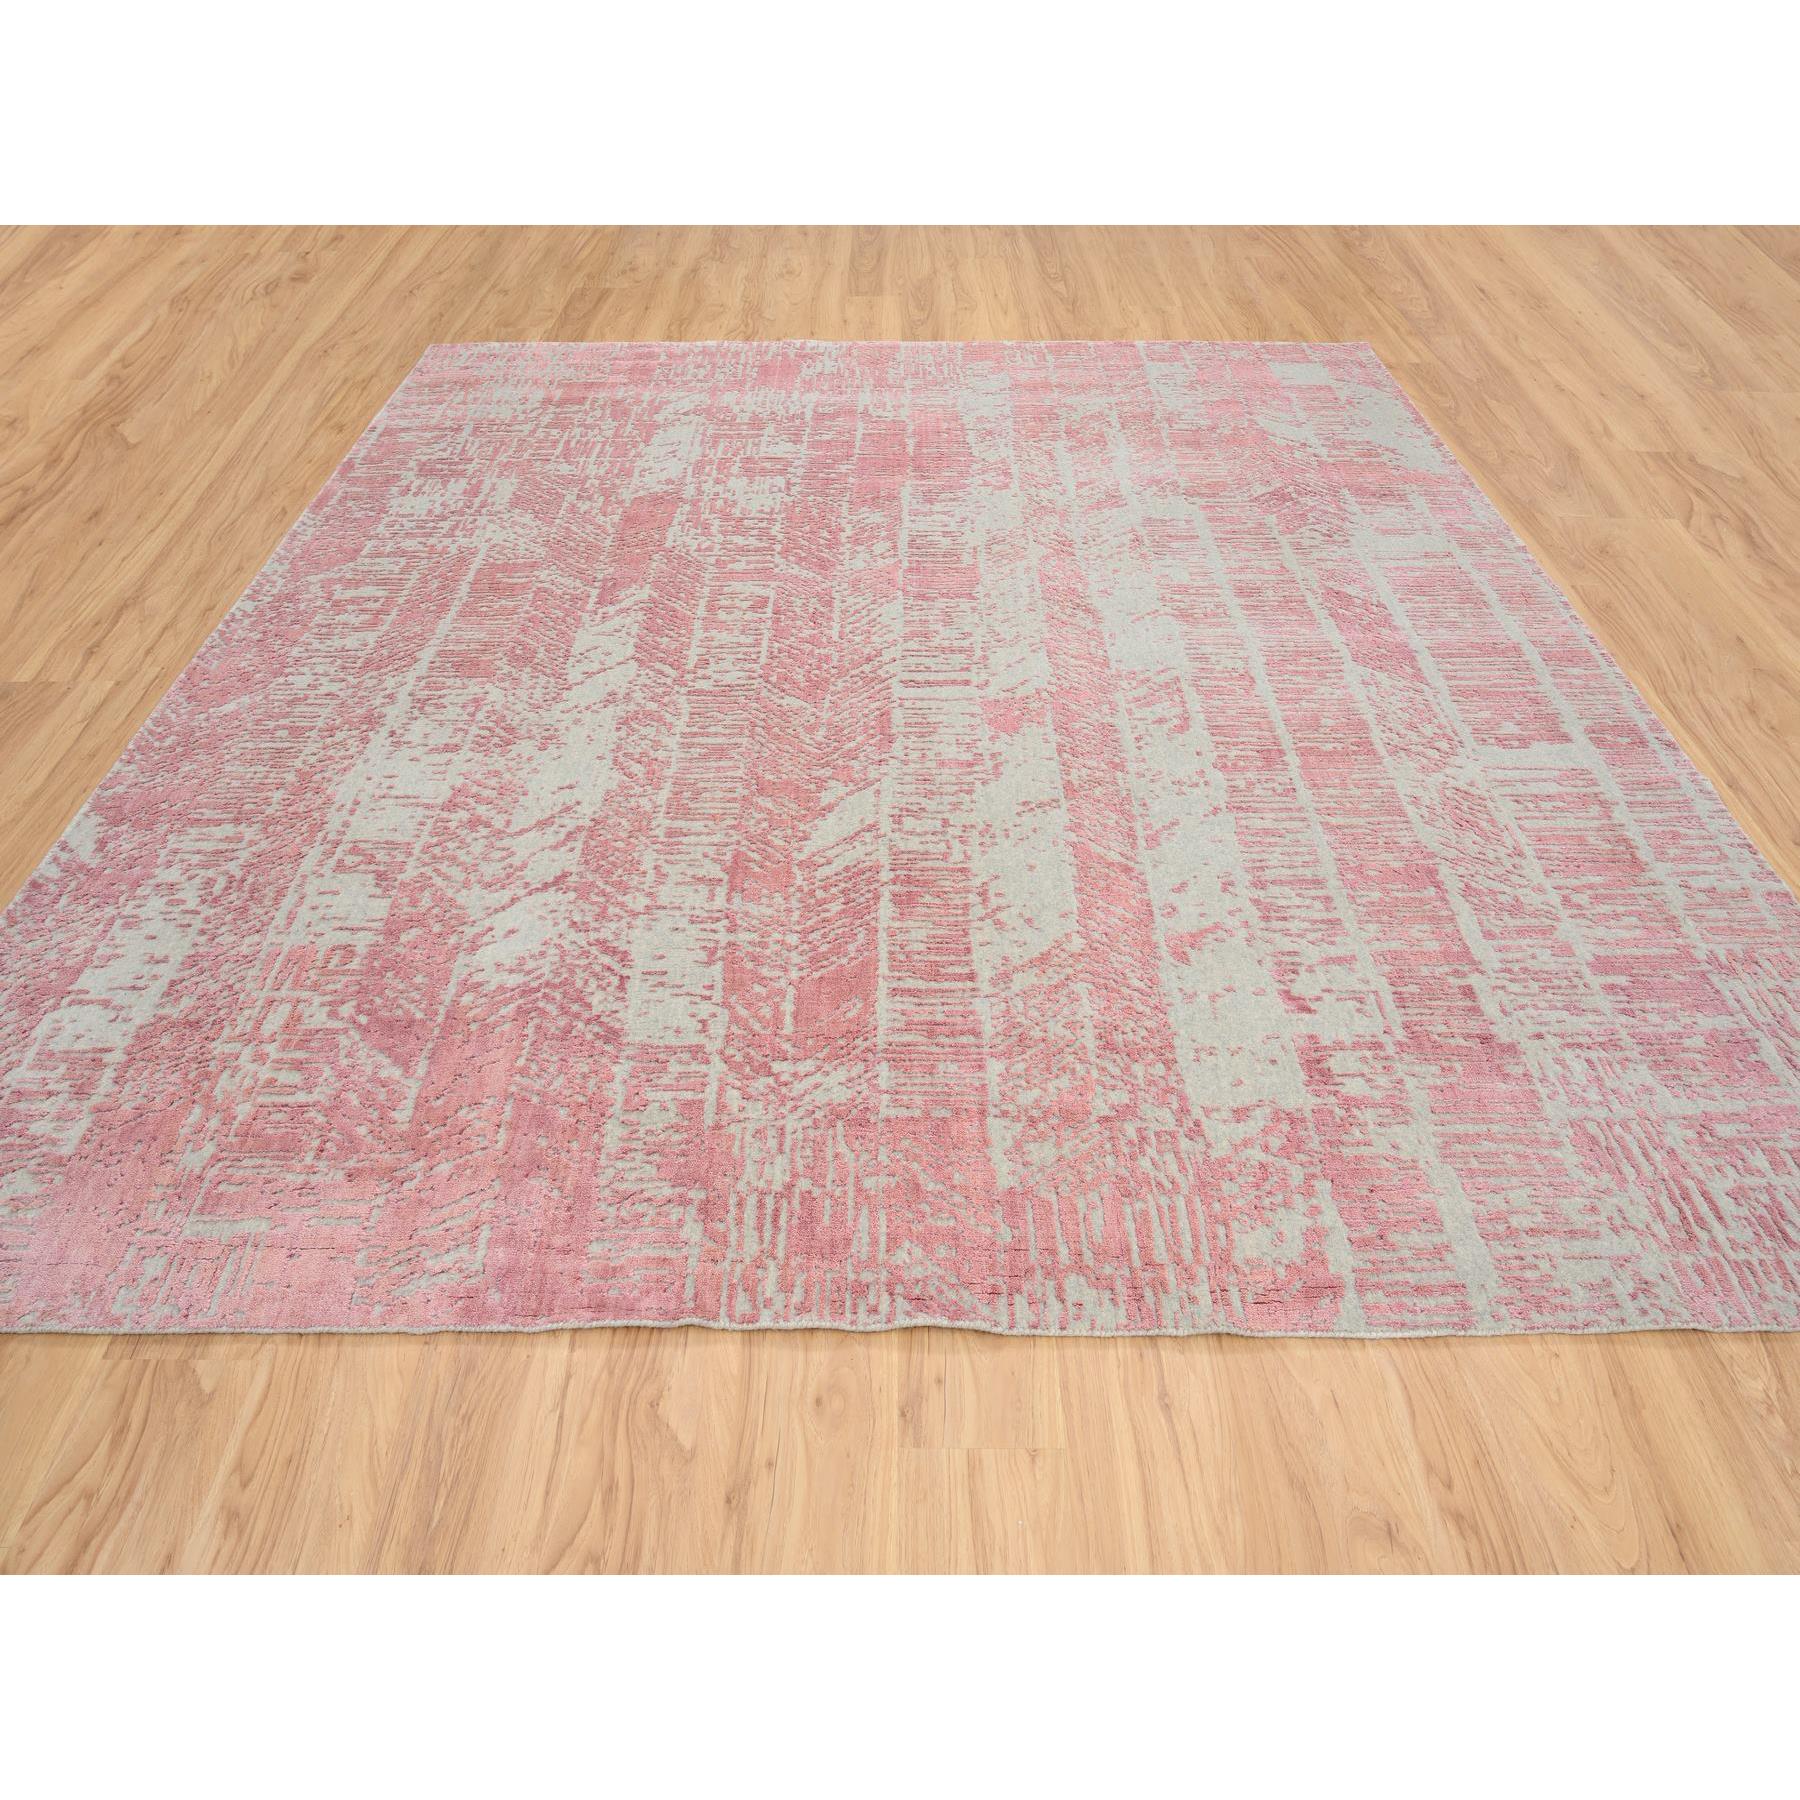 10'2"x10'2" Rose Pink, Wool and Art Silk Jacquard Hand Loomed, All Over Design, Square Oriental Rug 